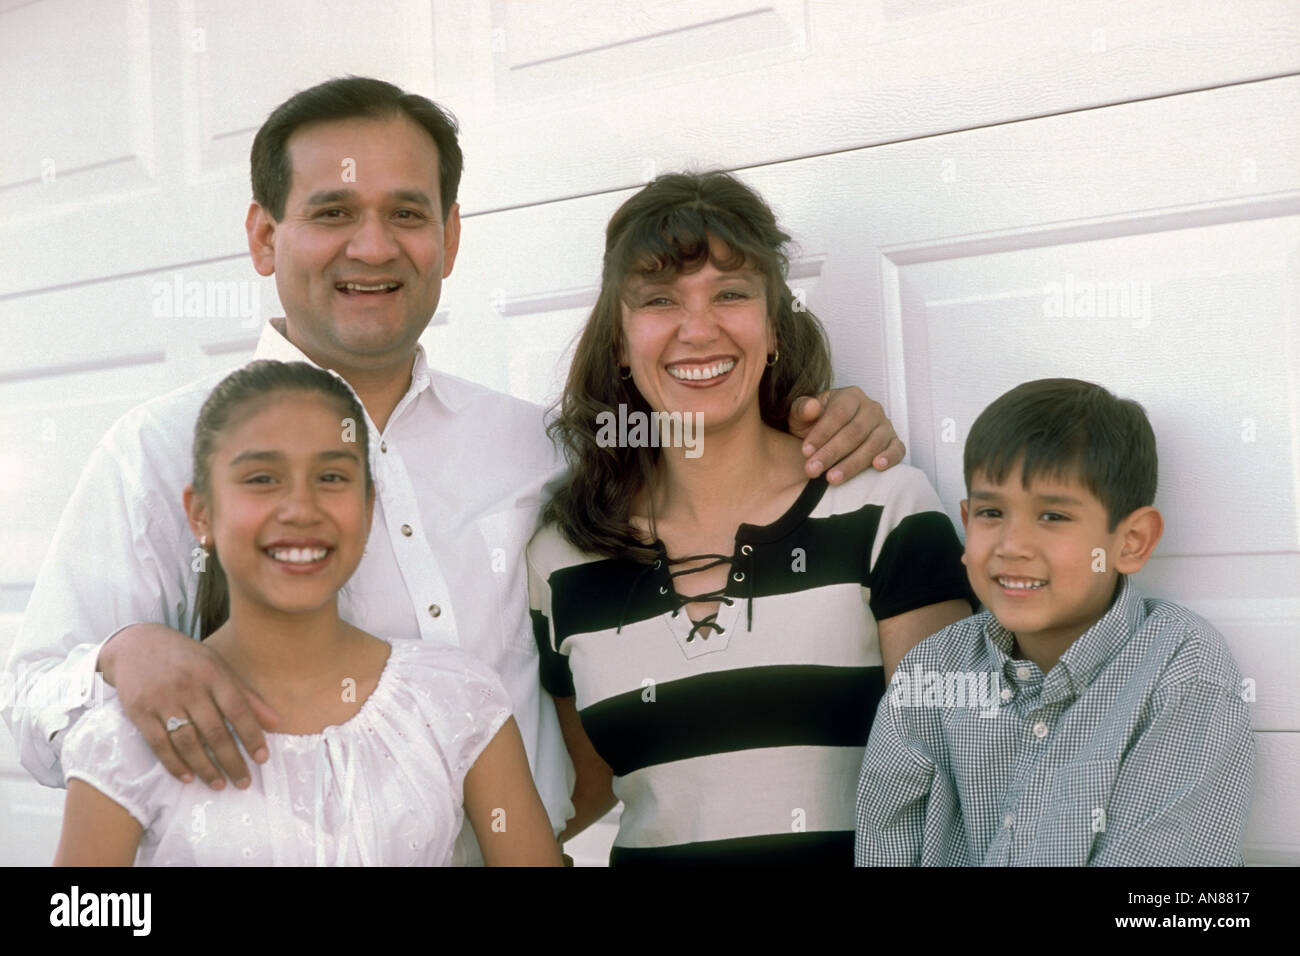 Portrait of Mexican family with 2 kids against white garage wall Stock Photo